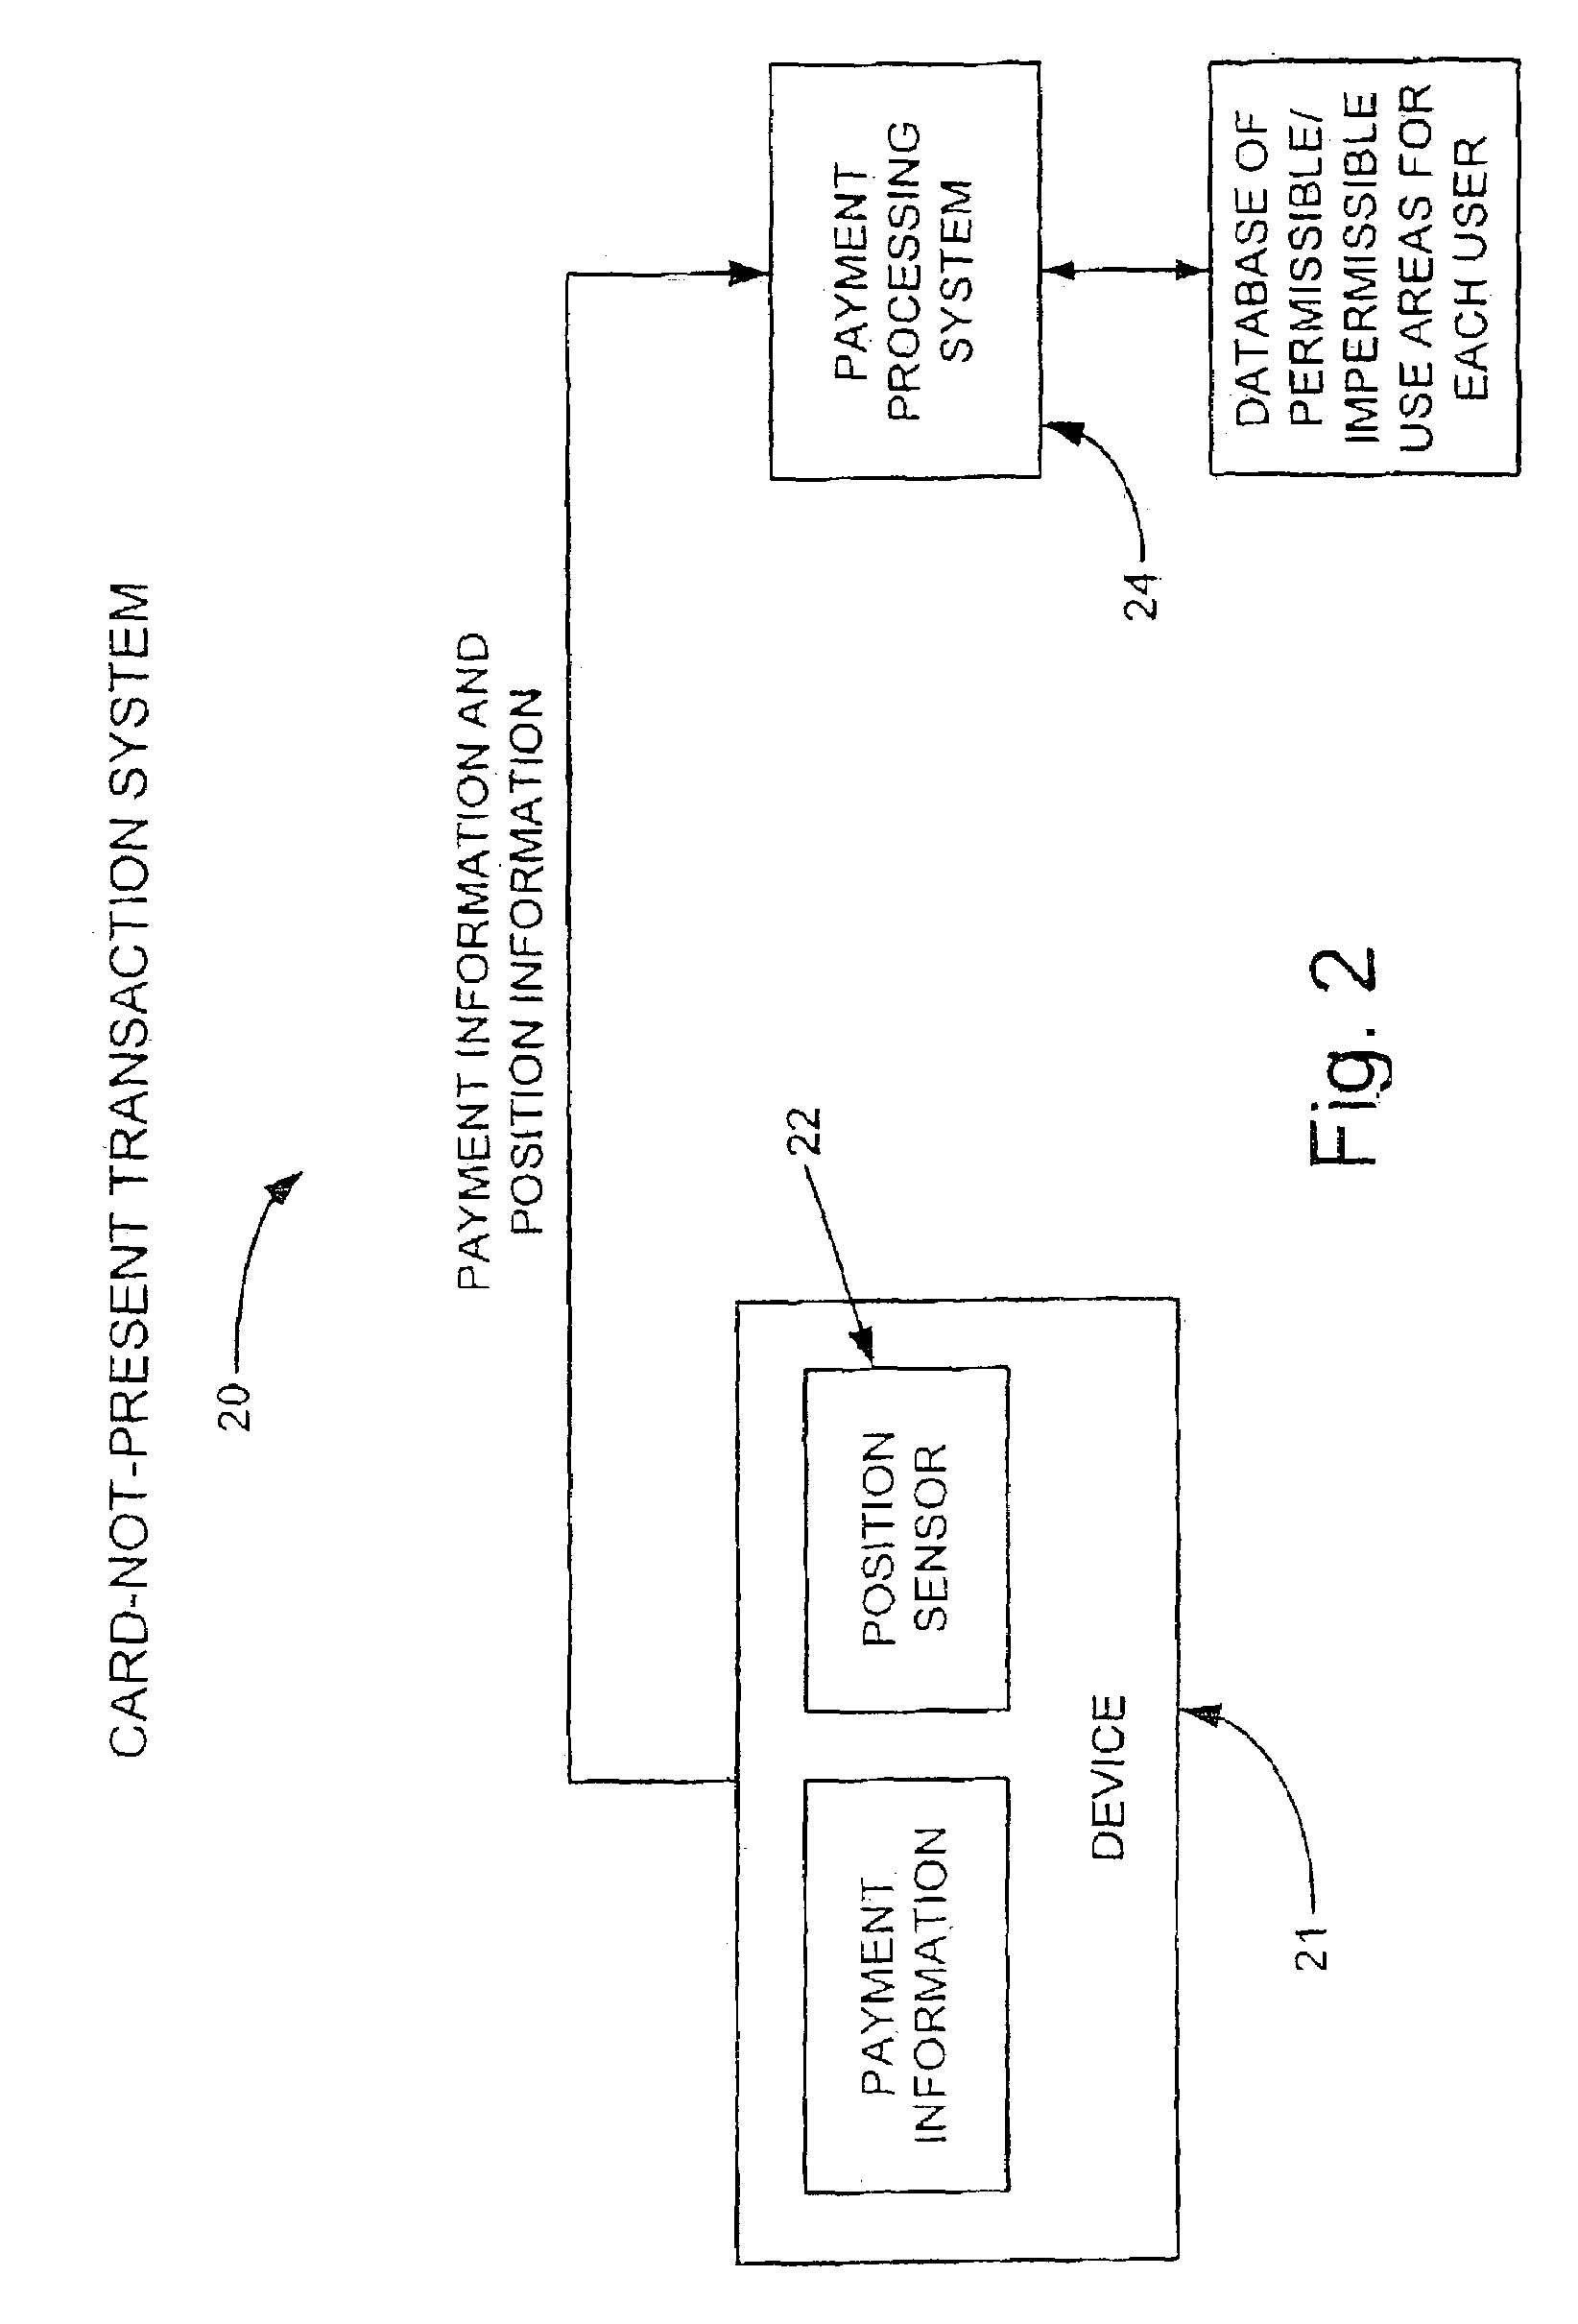 Location based fraud reduction system and method